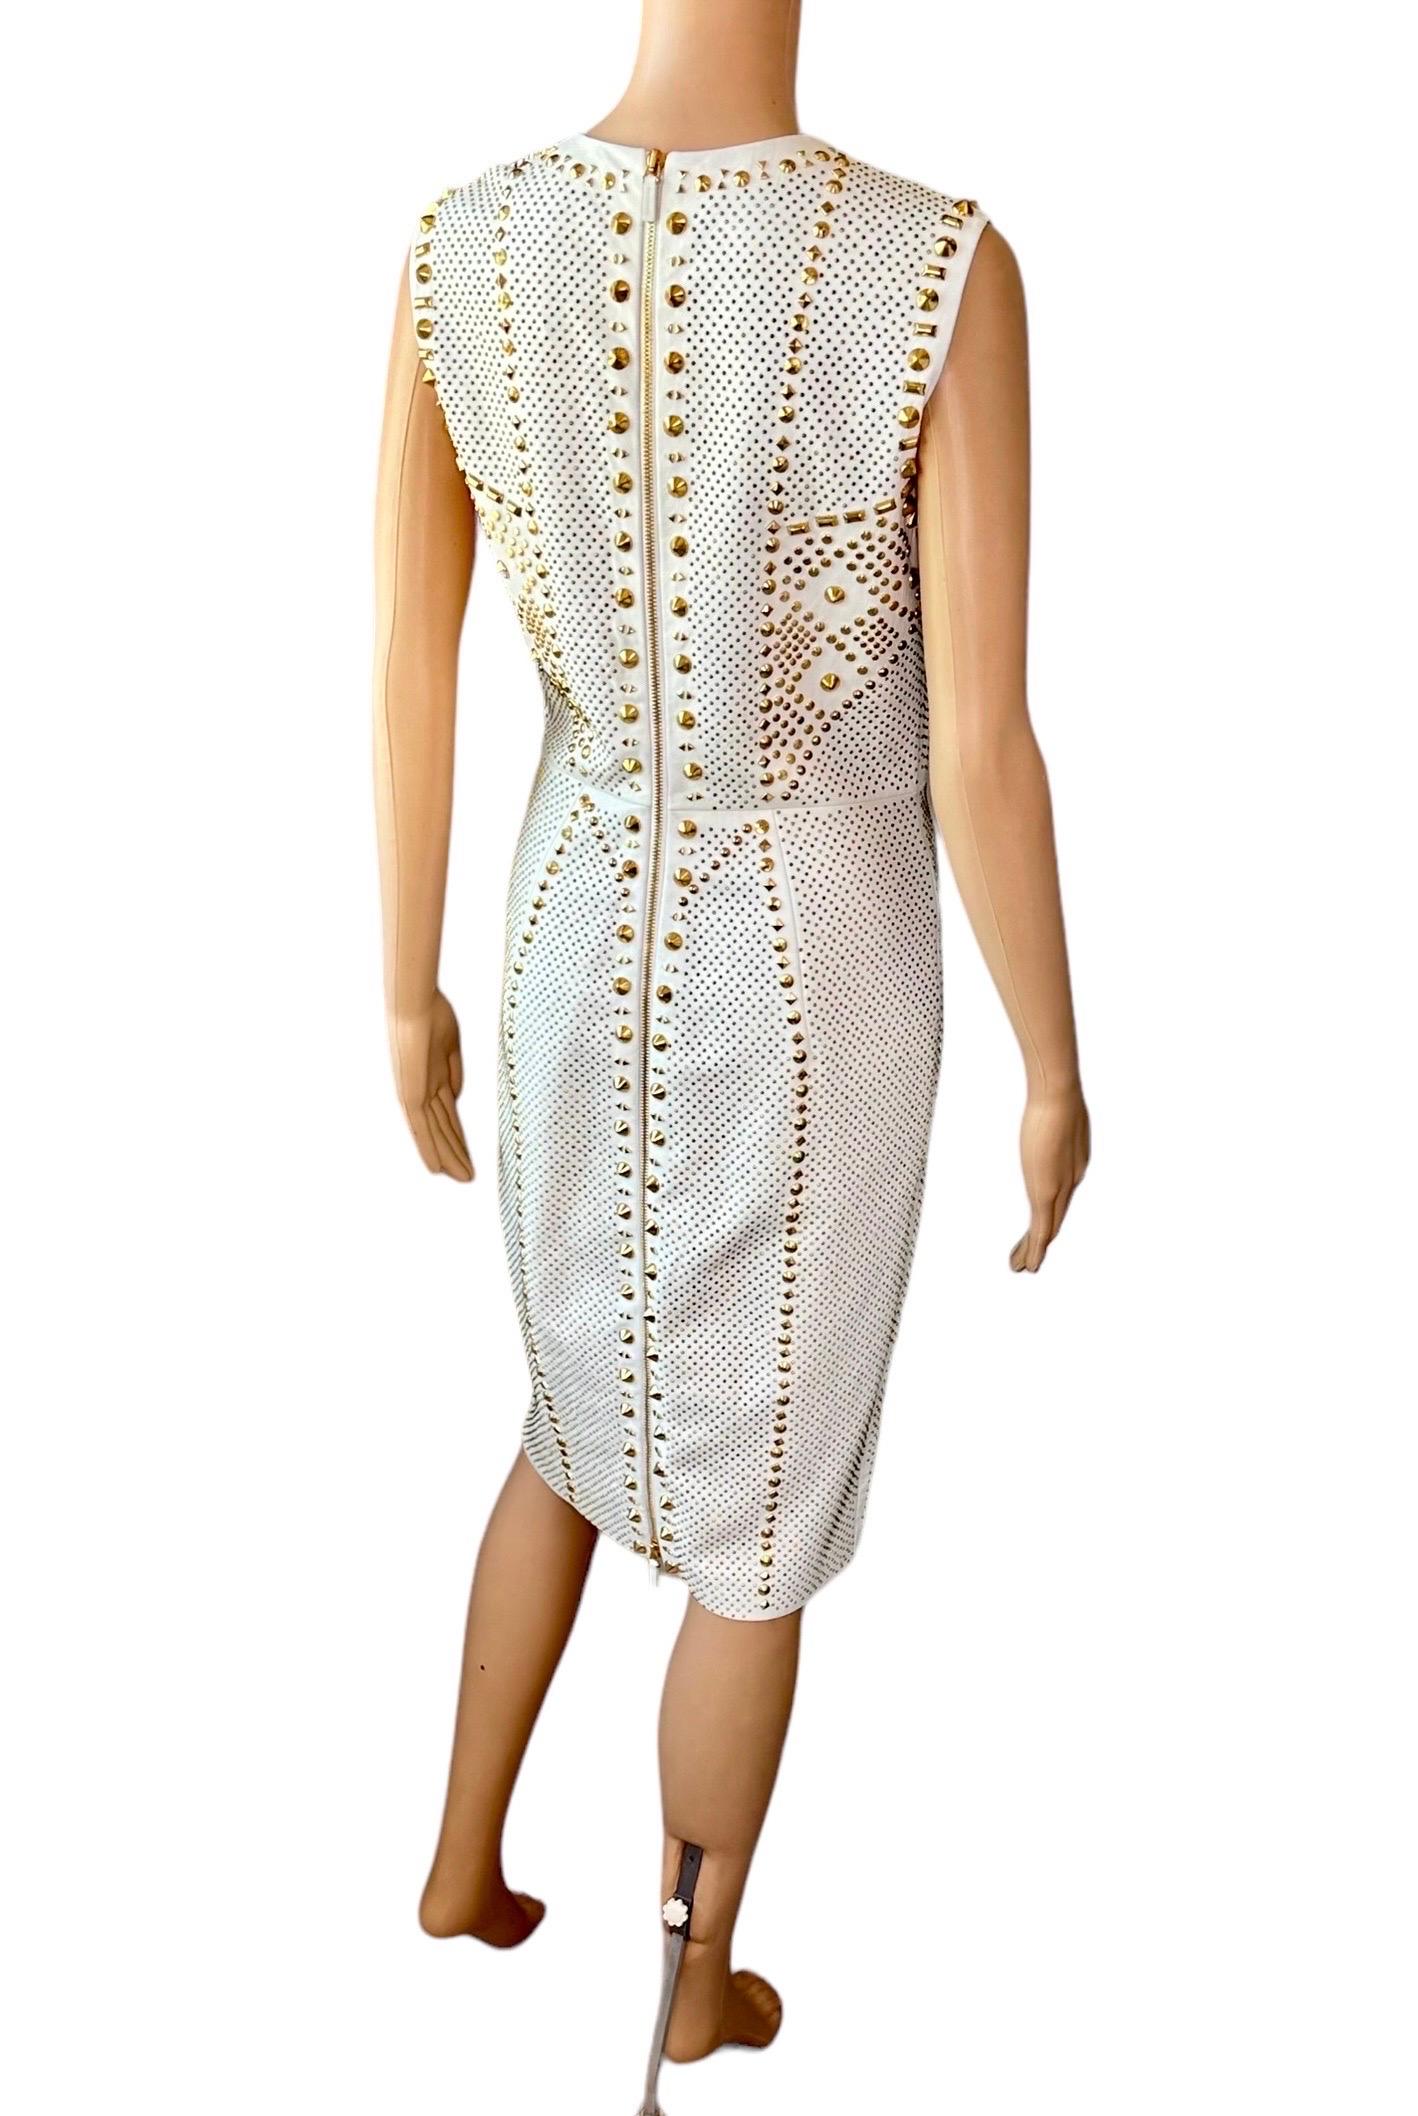 Versace S/S 2012 Runway Embellished Gold Studded Ivory Leather Dress  For Sale 9